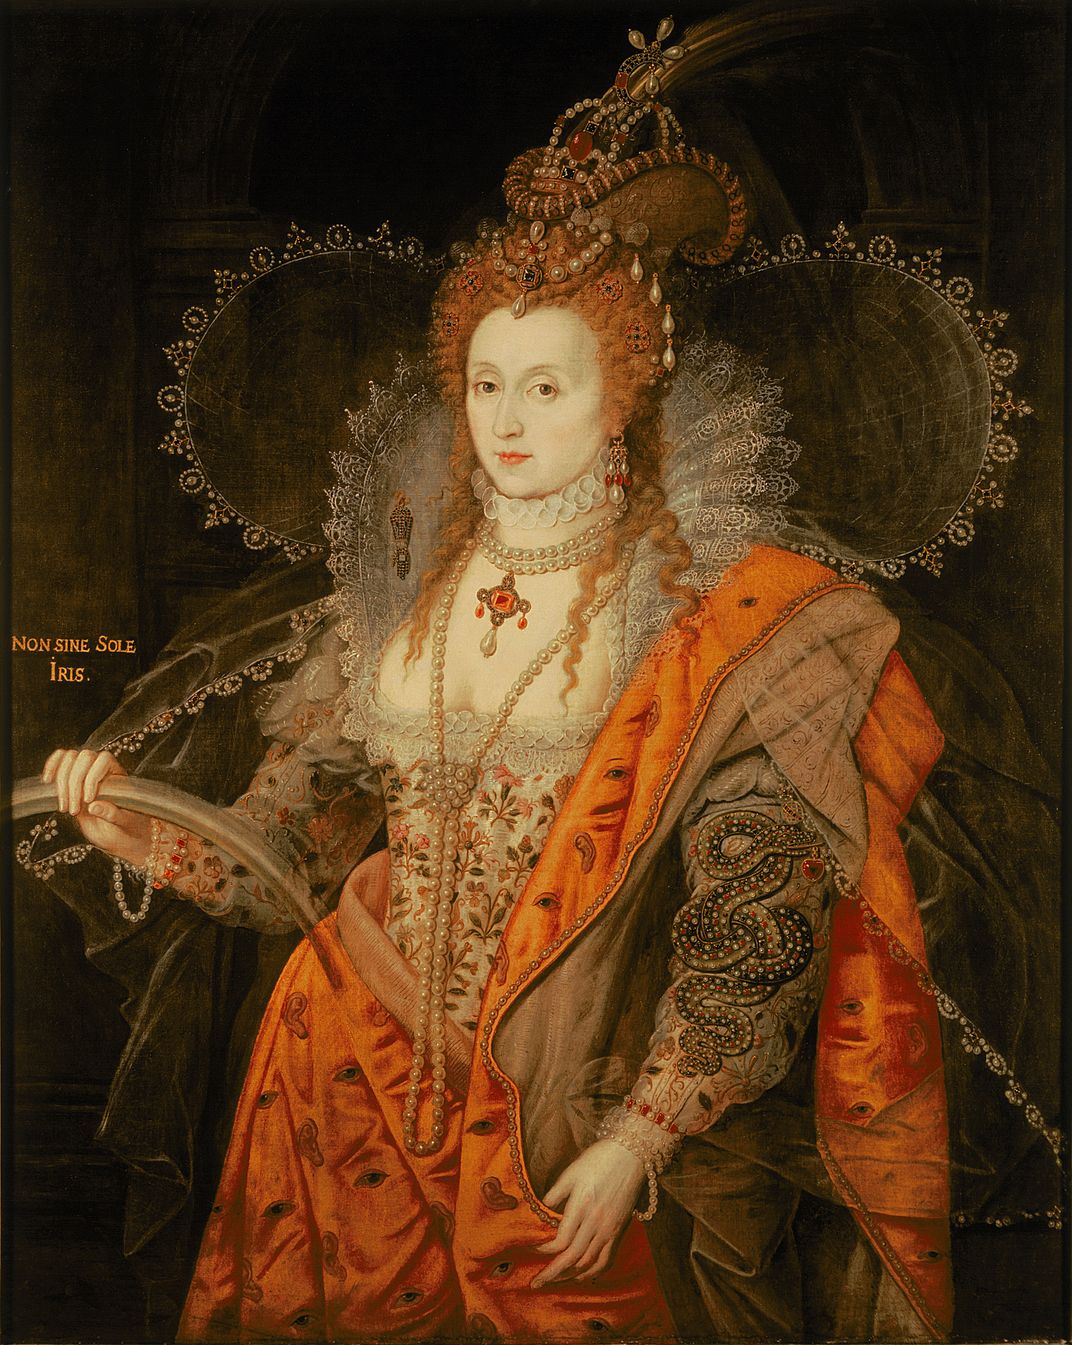 Attributed to Marcus Gheeraerts the Younger, Elizabeth I (The Rainbow Portrait), circa 1602